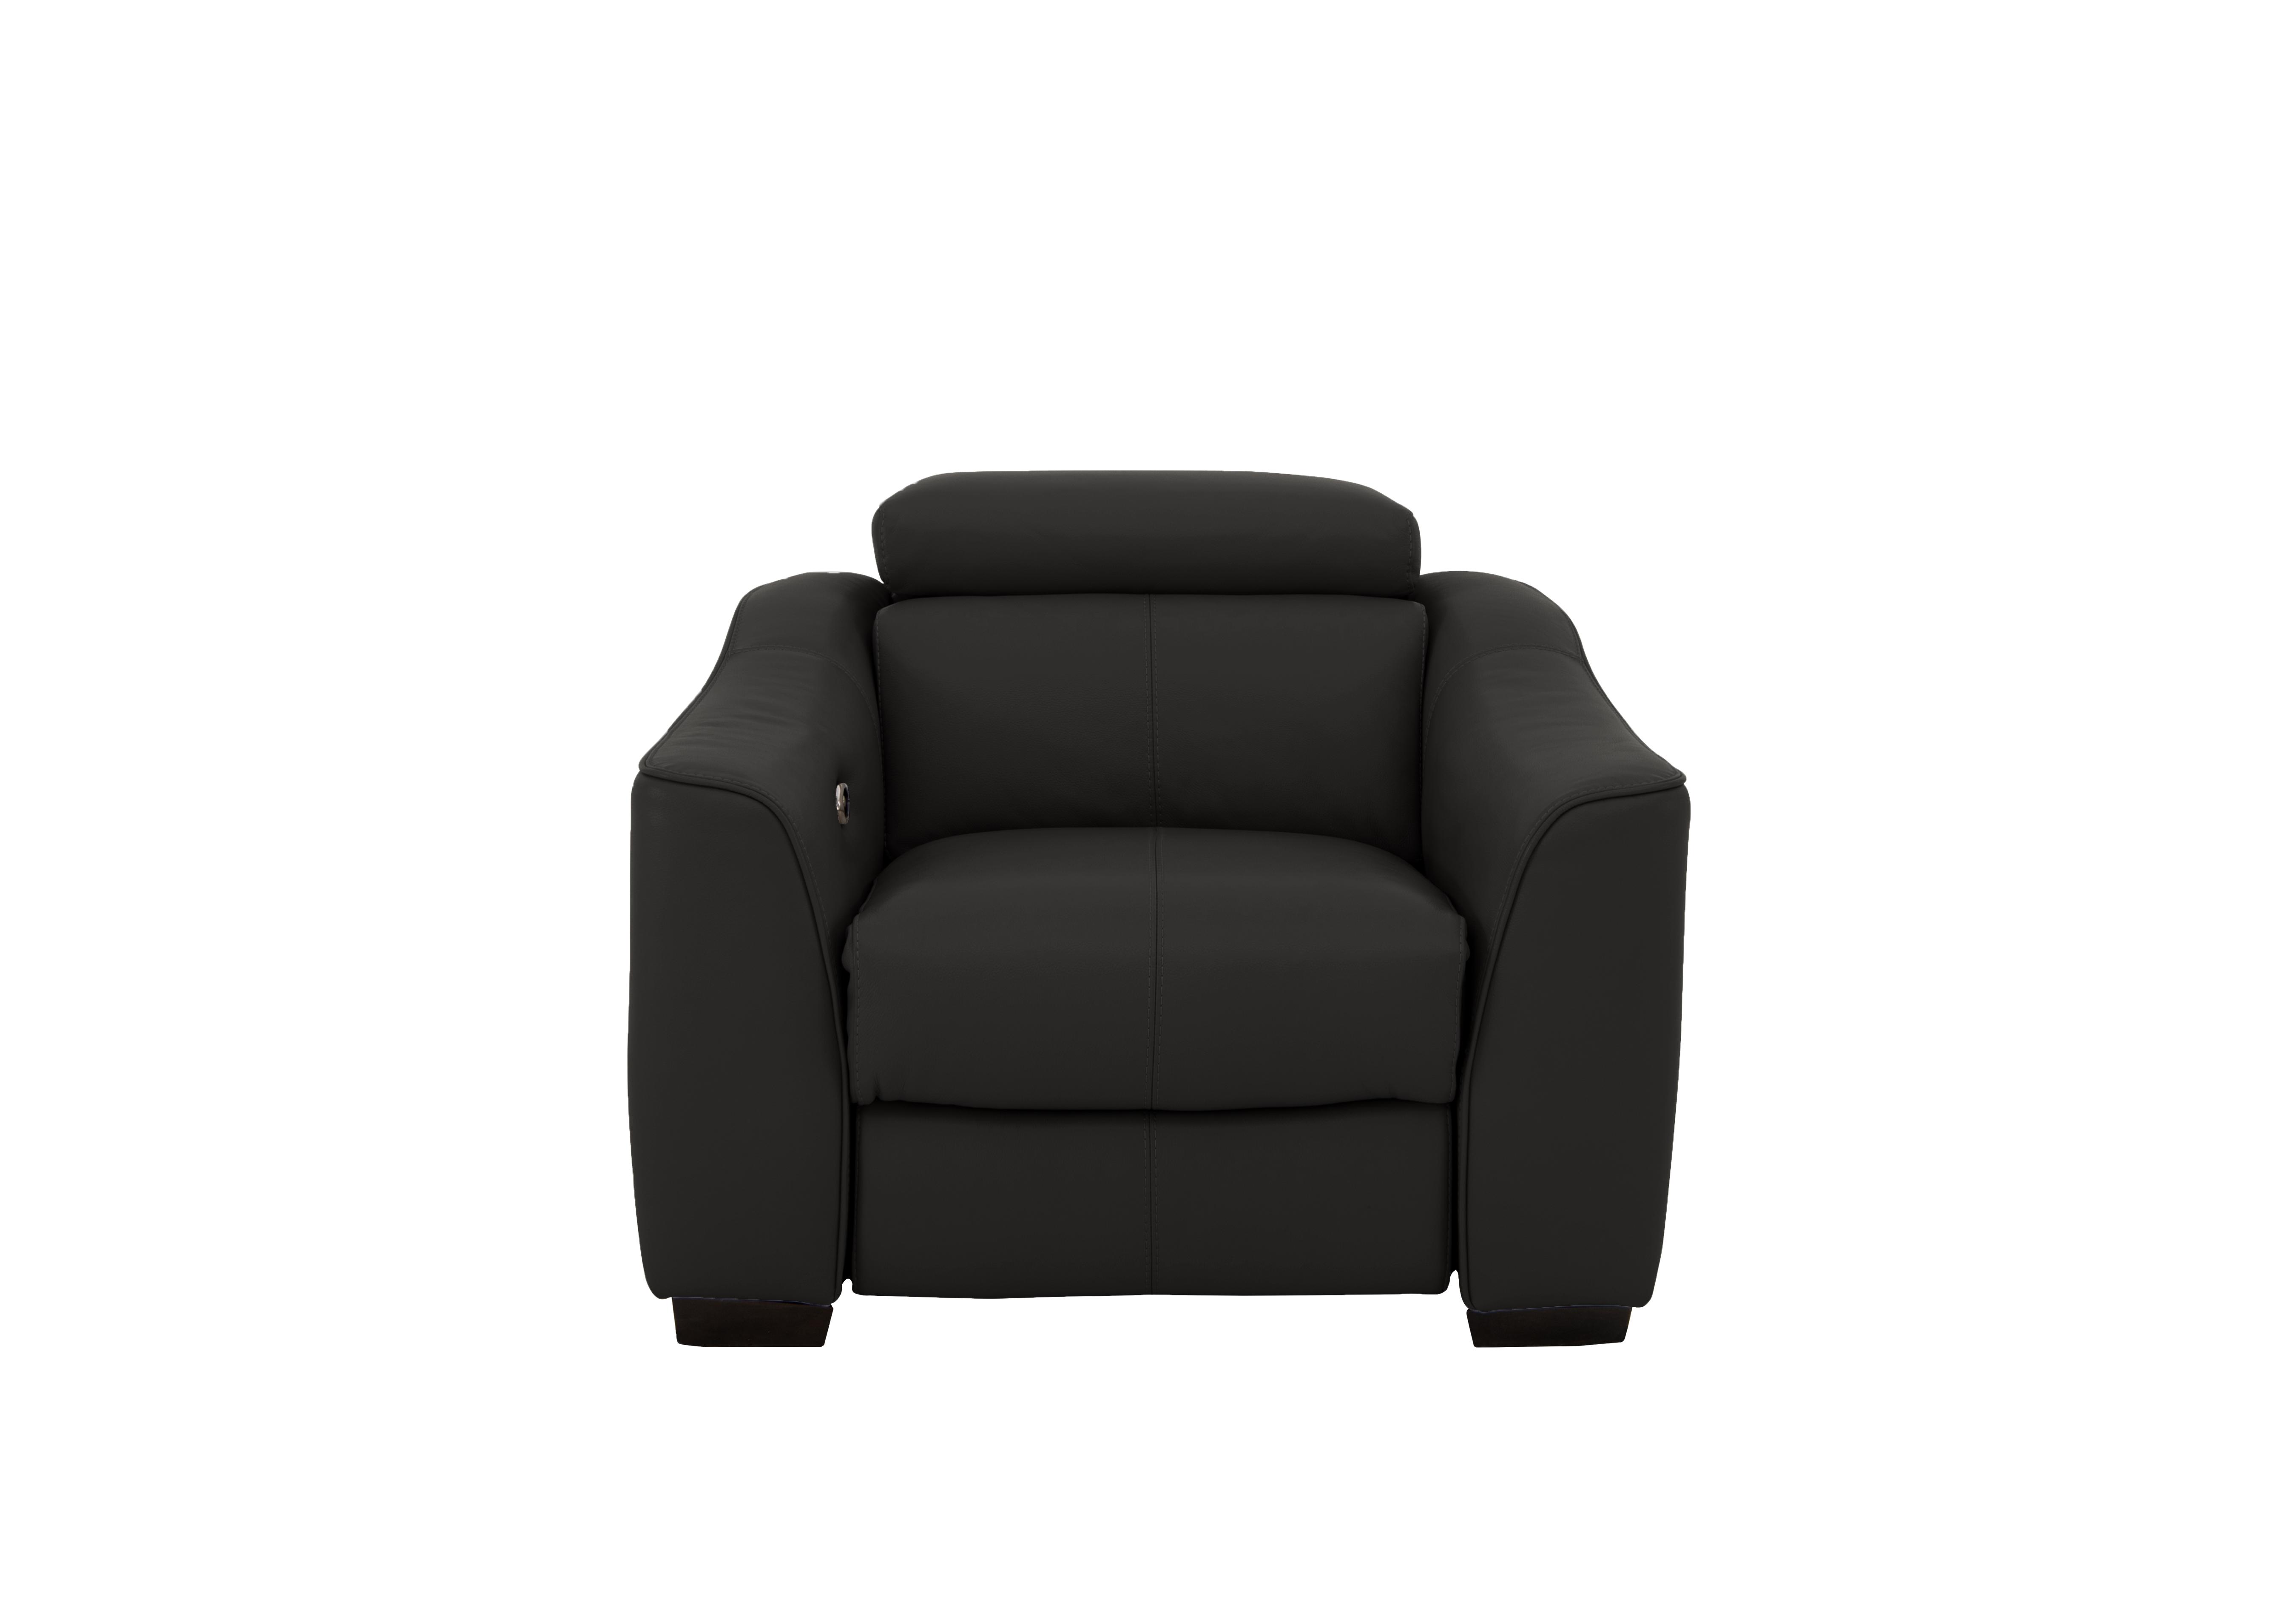 Elixir Leather Armchair in Bv-3500 Classic Black on Furniture Village